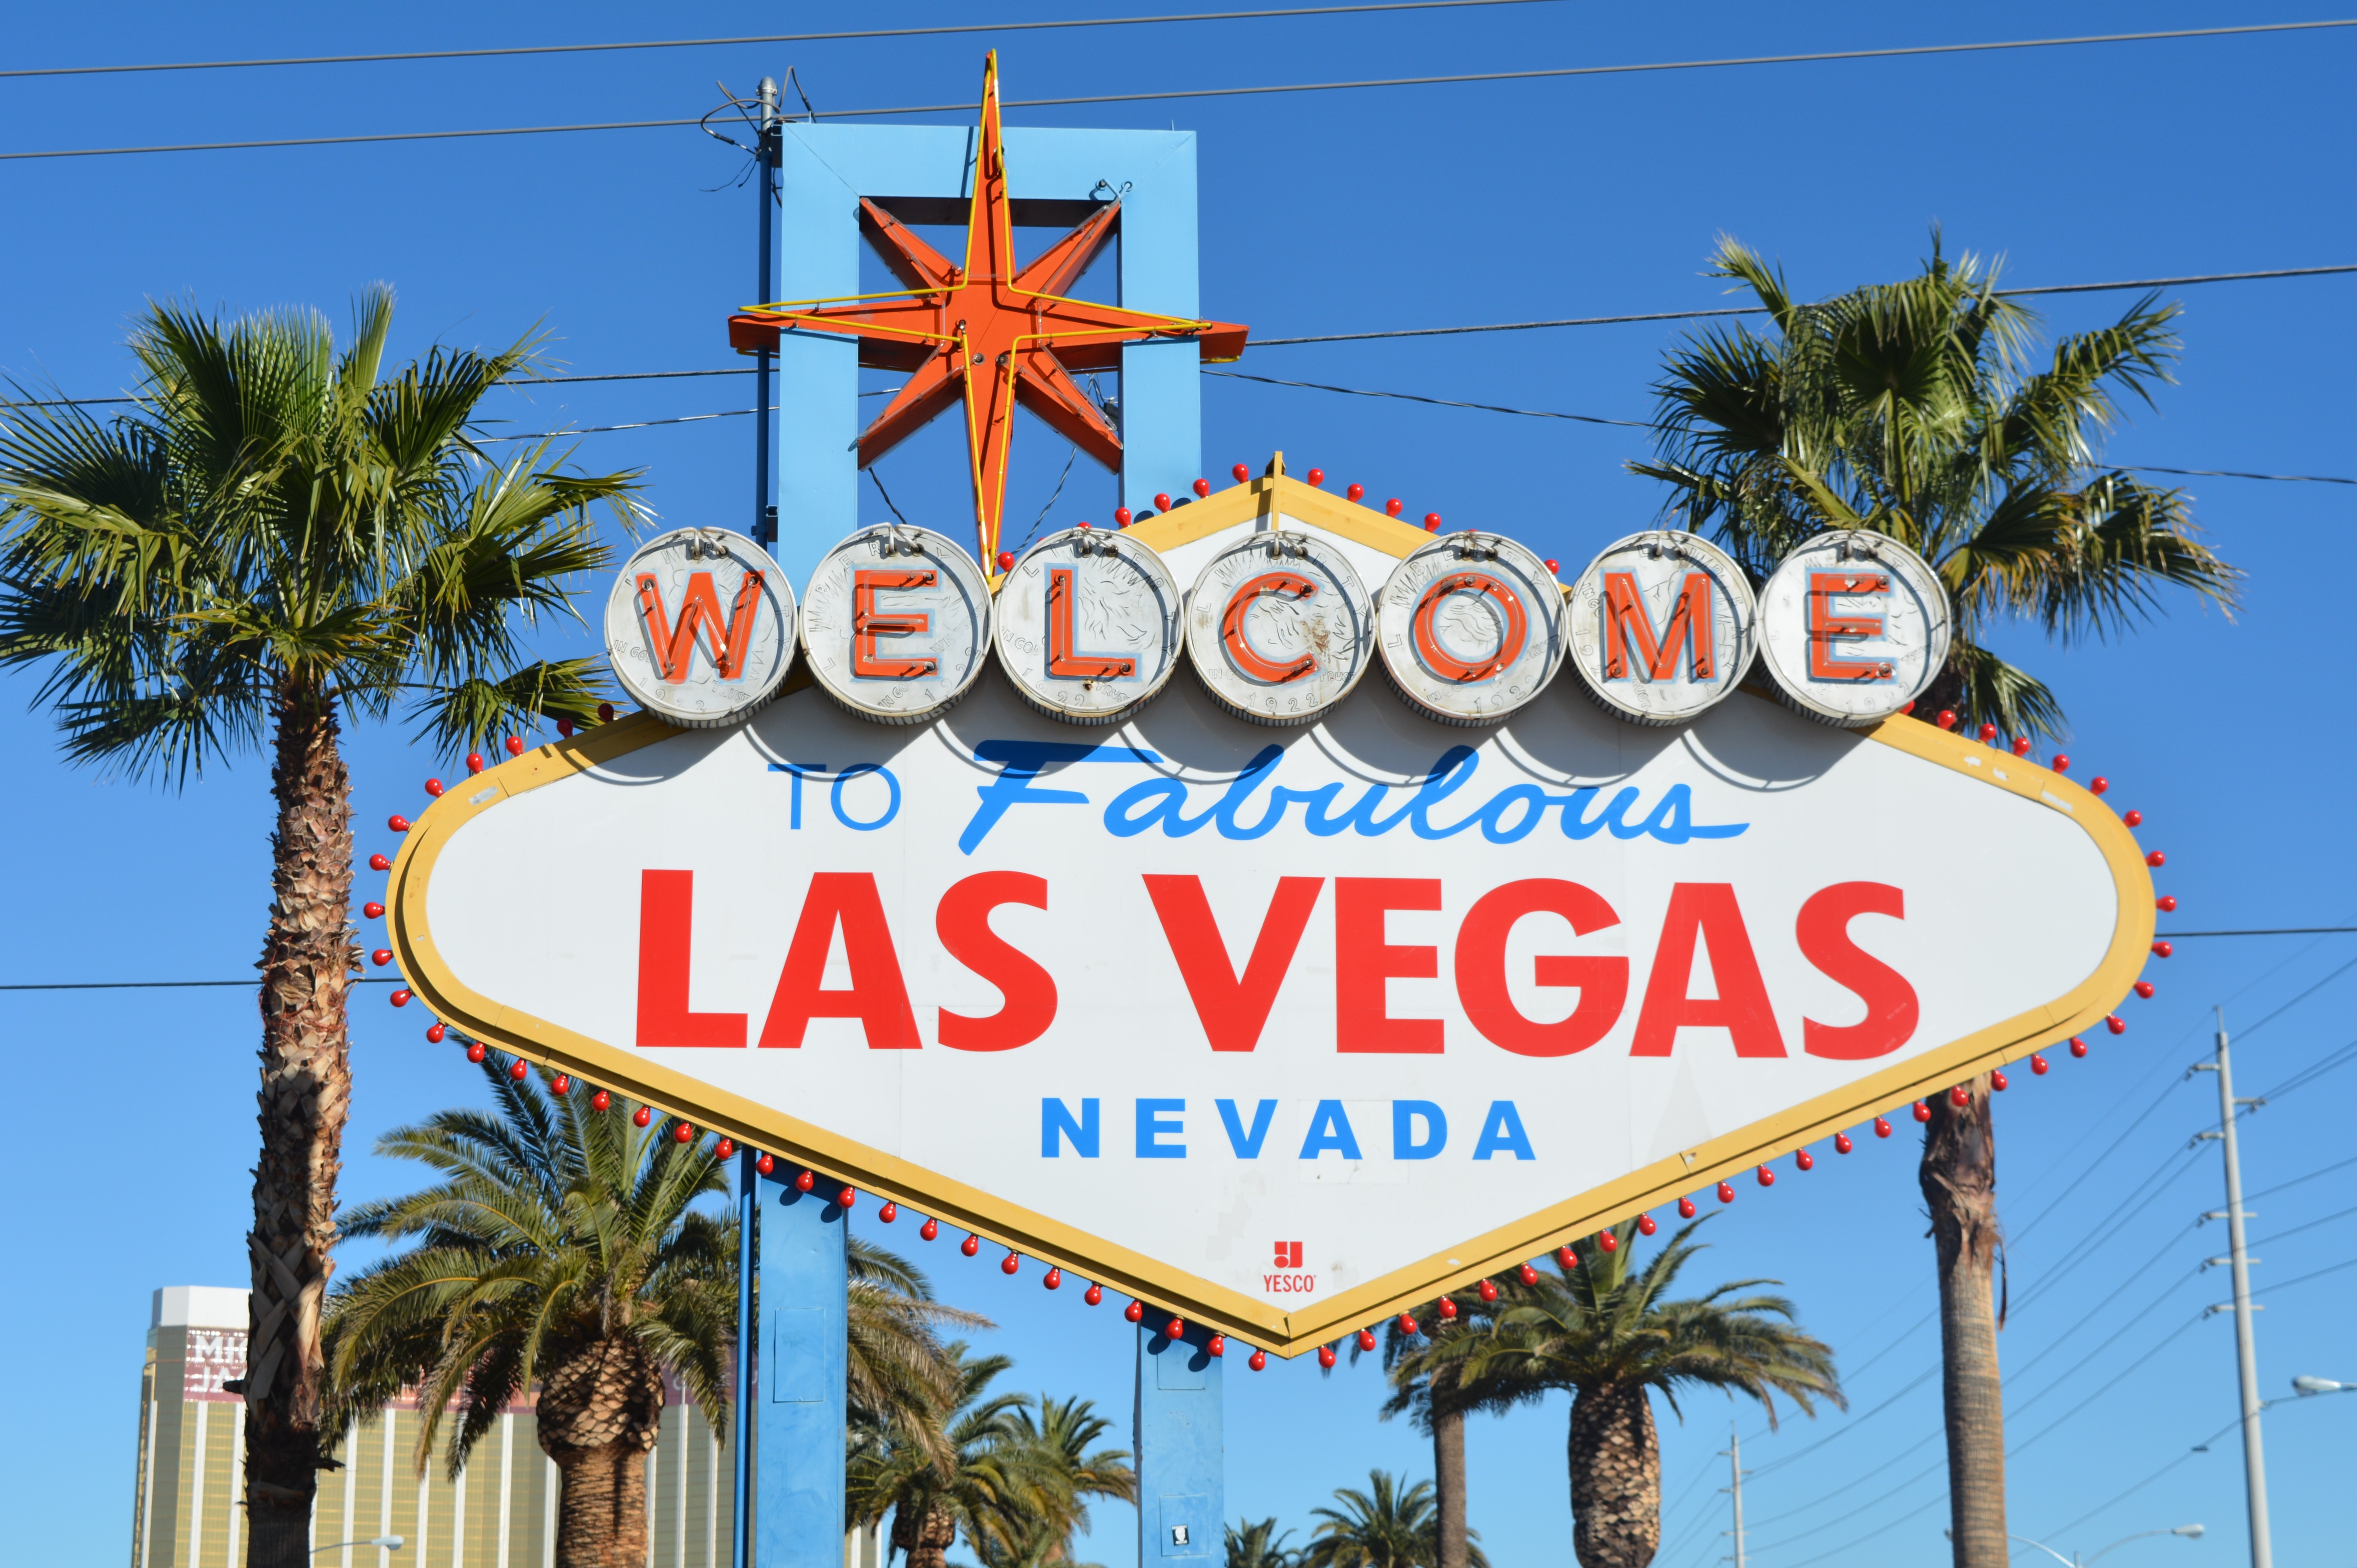 Things to Do in Las Vegas With Kids – We Go With Kids!